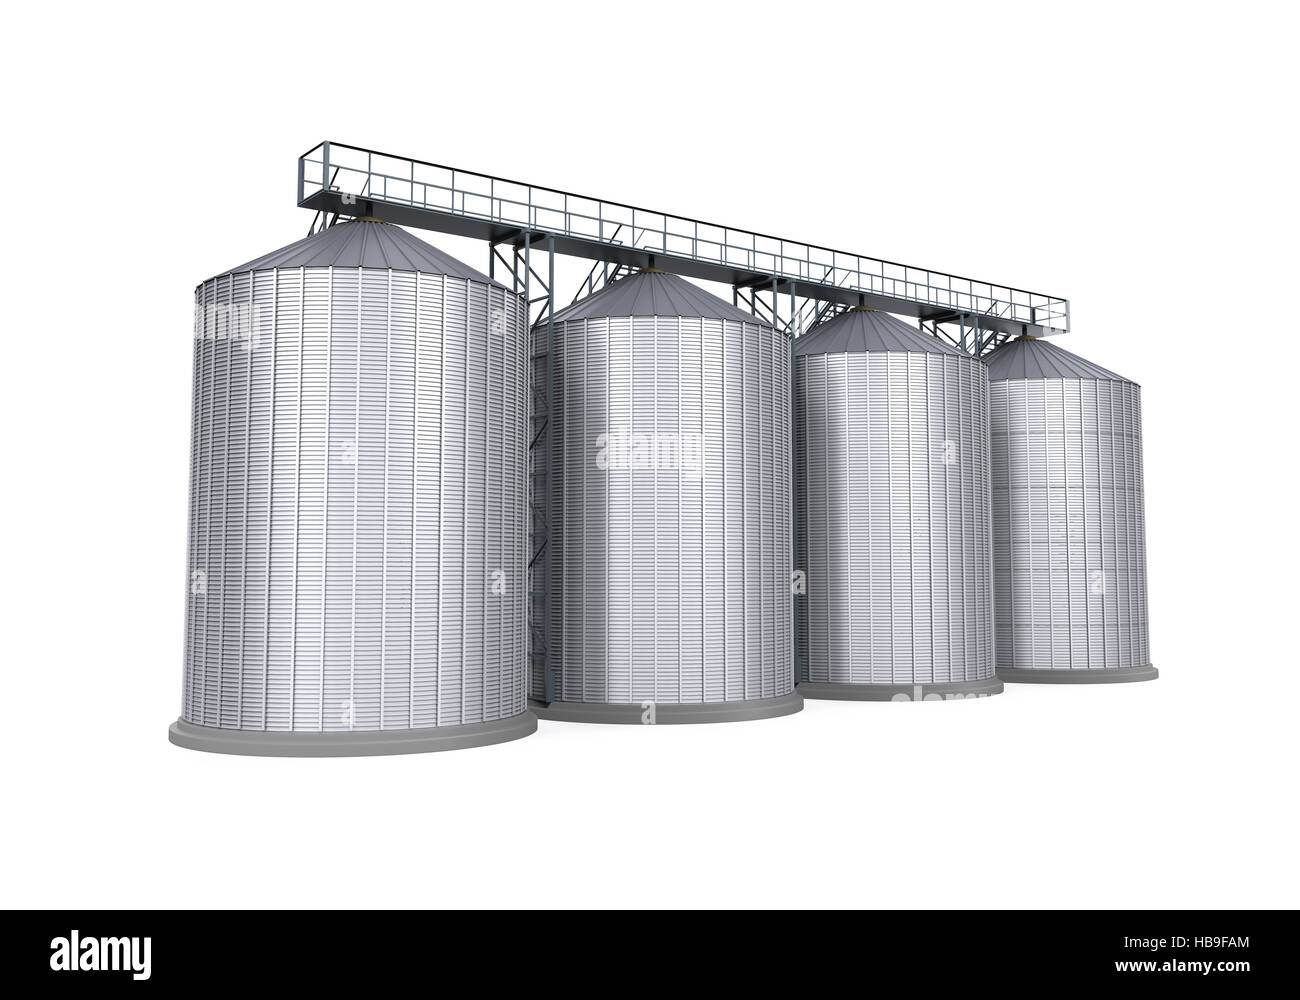 Agricultural Silo Isolated Stock Photo